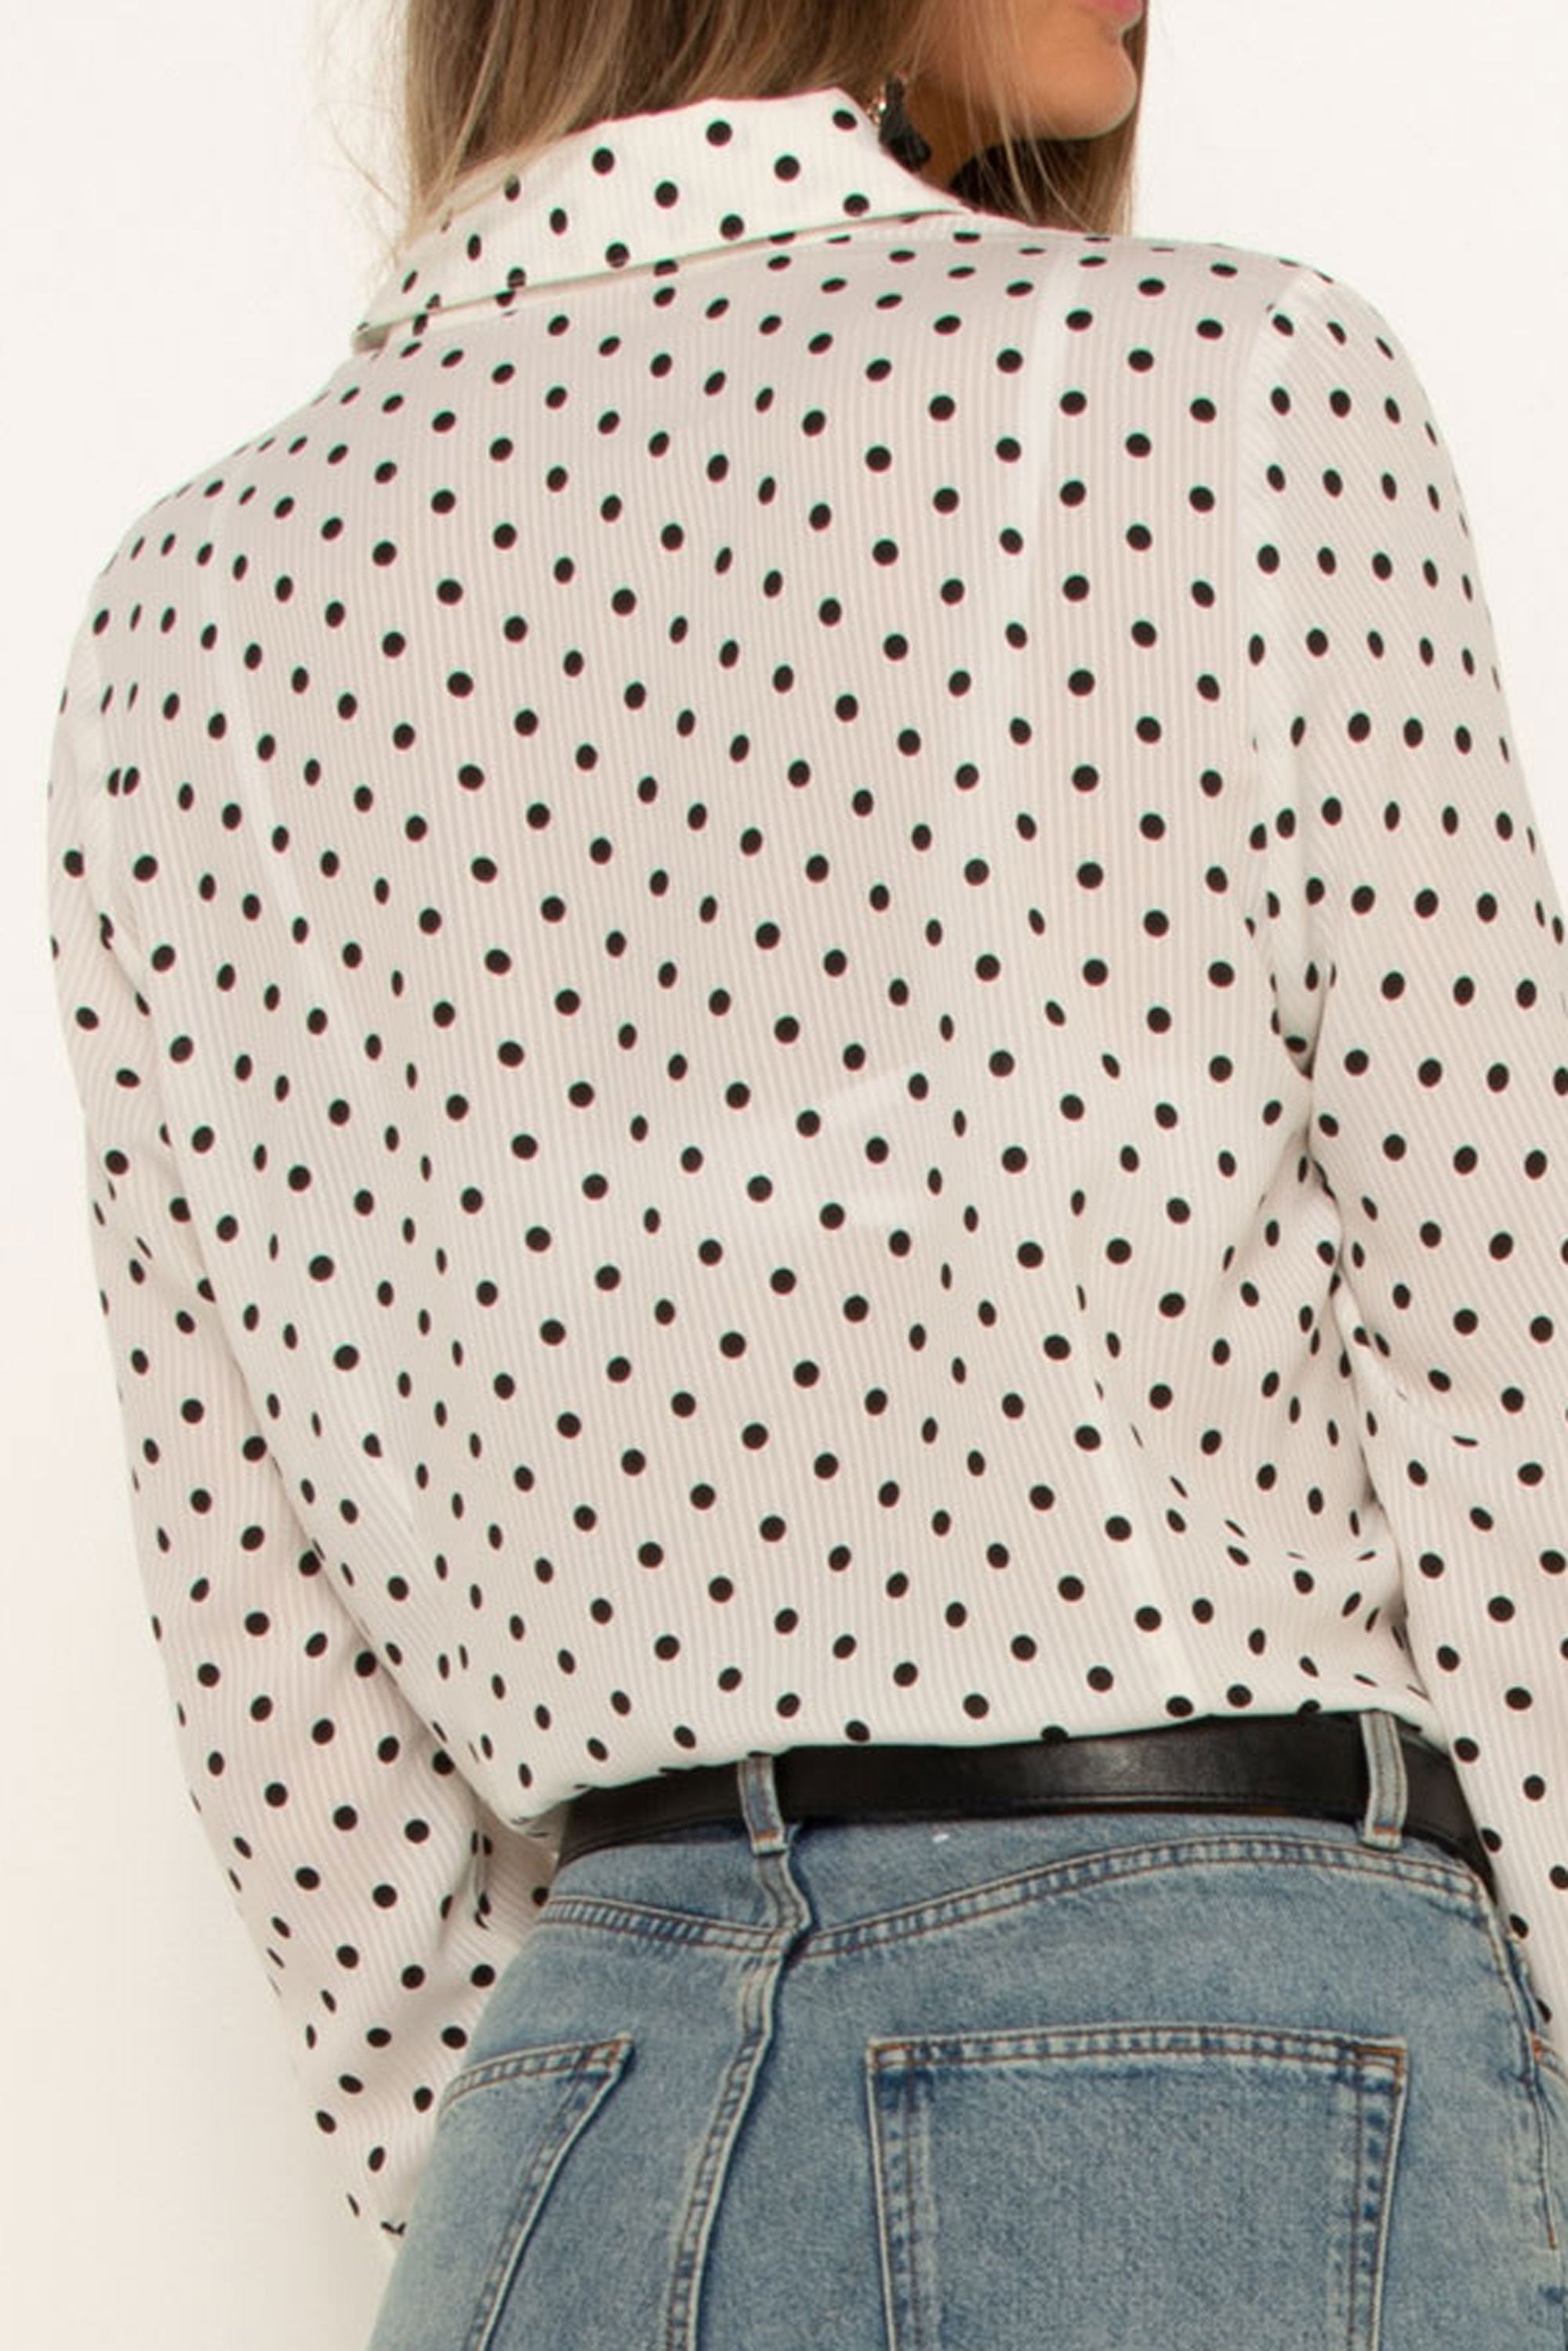 tall-girl-wearing-white-polka-dot-shirt-tucked-in-casual-look